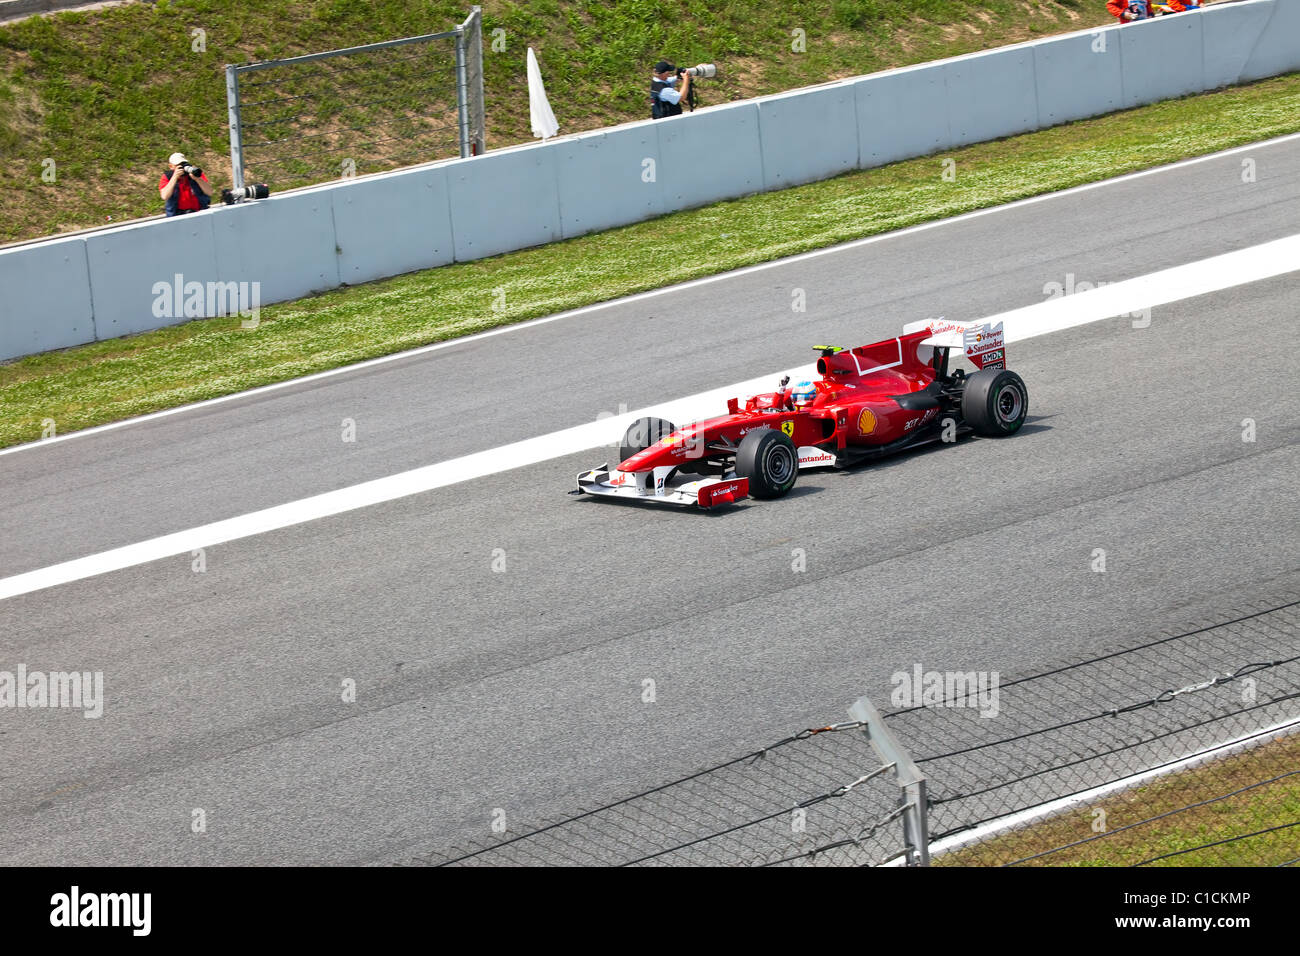 Racing cars on a  circuit during The Formula 1 Grand Prix at autodrome 'Catalunya Montmello' on May 9, 2010 in Barcelona Stock Photo